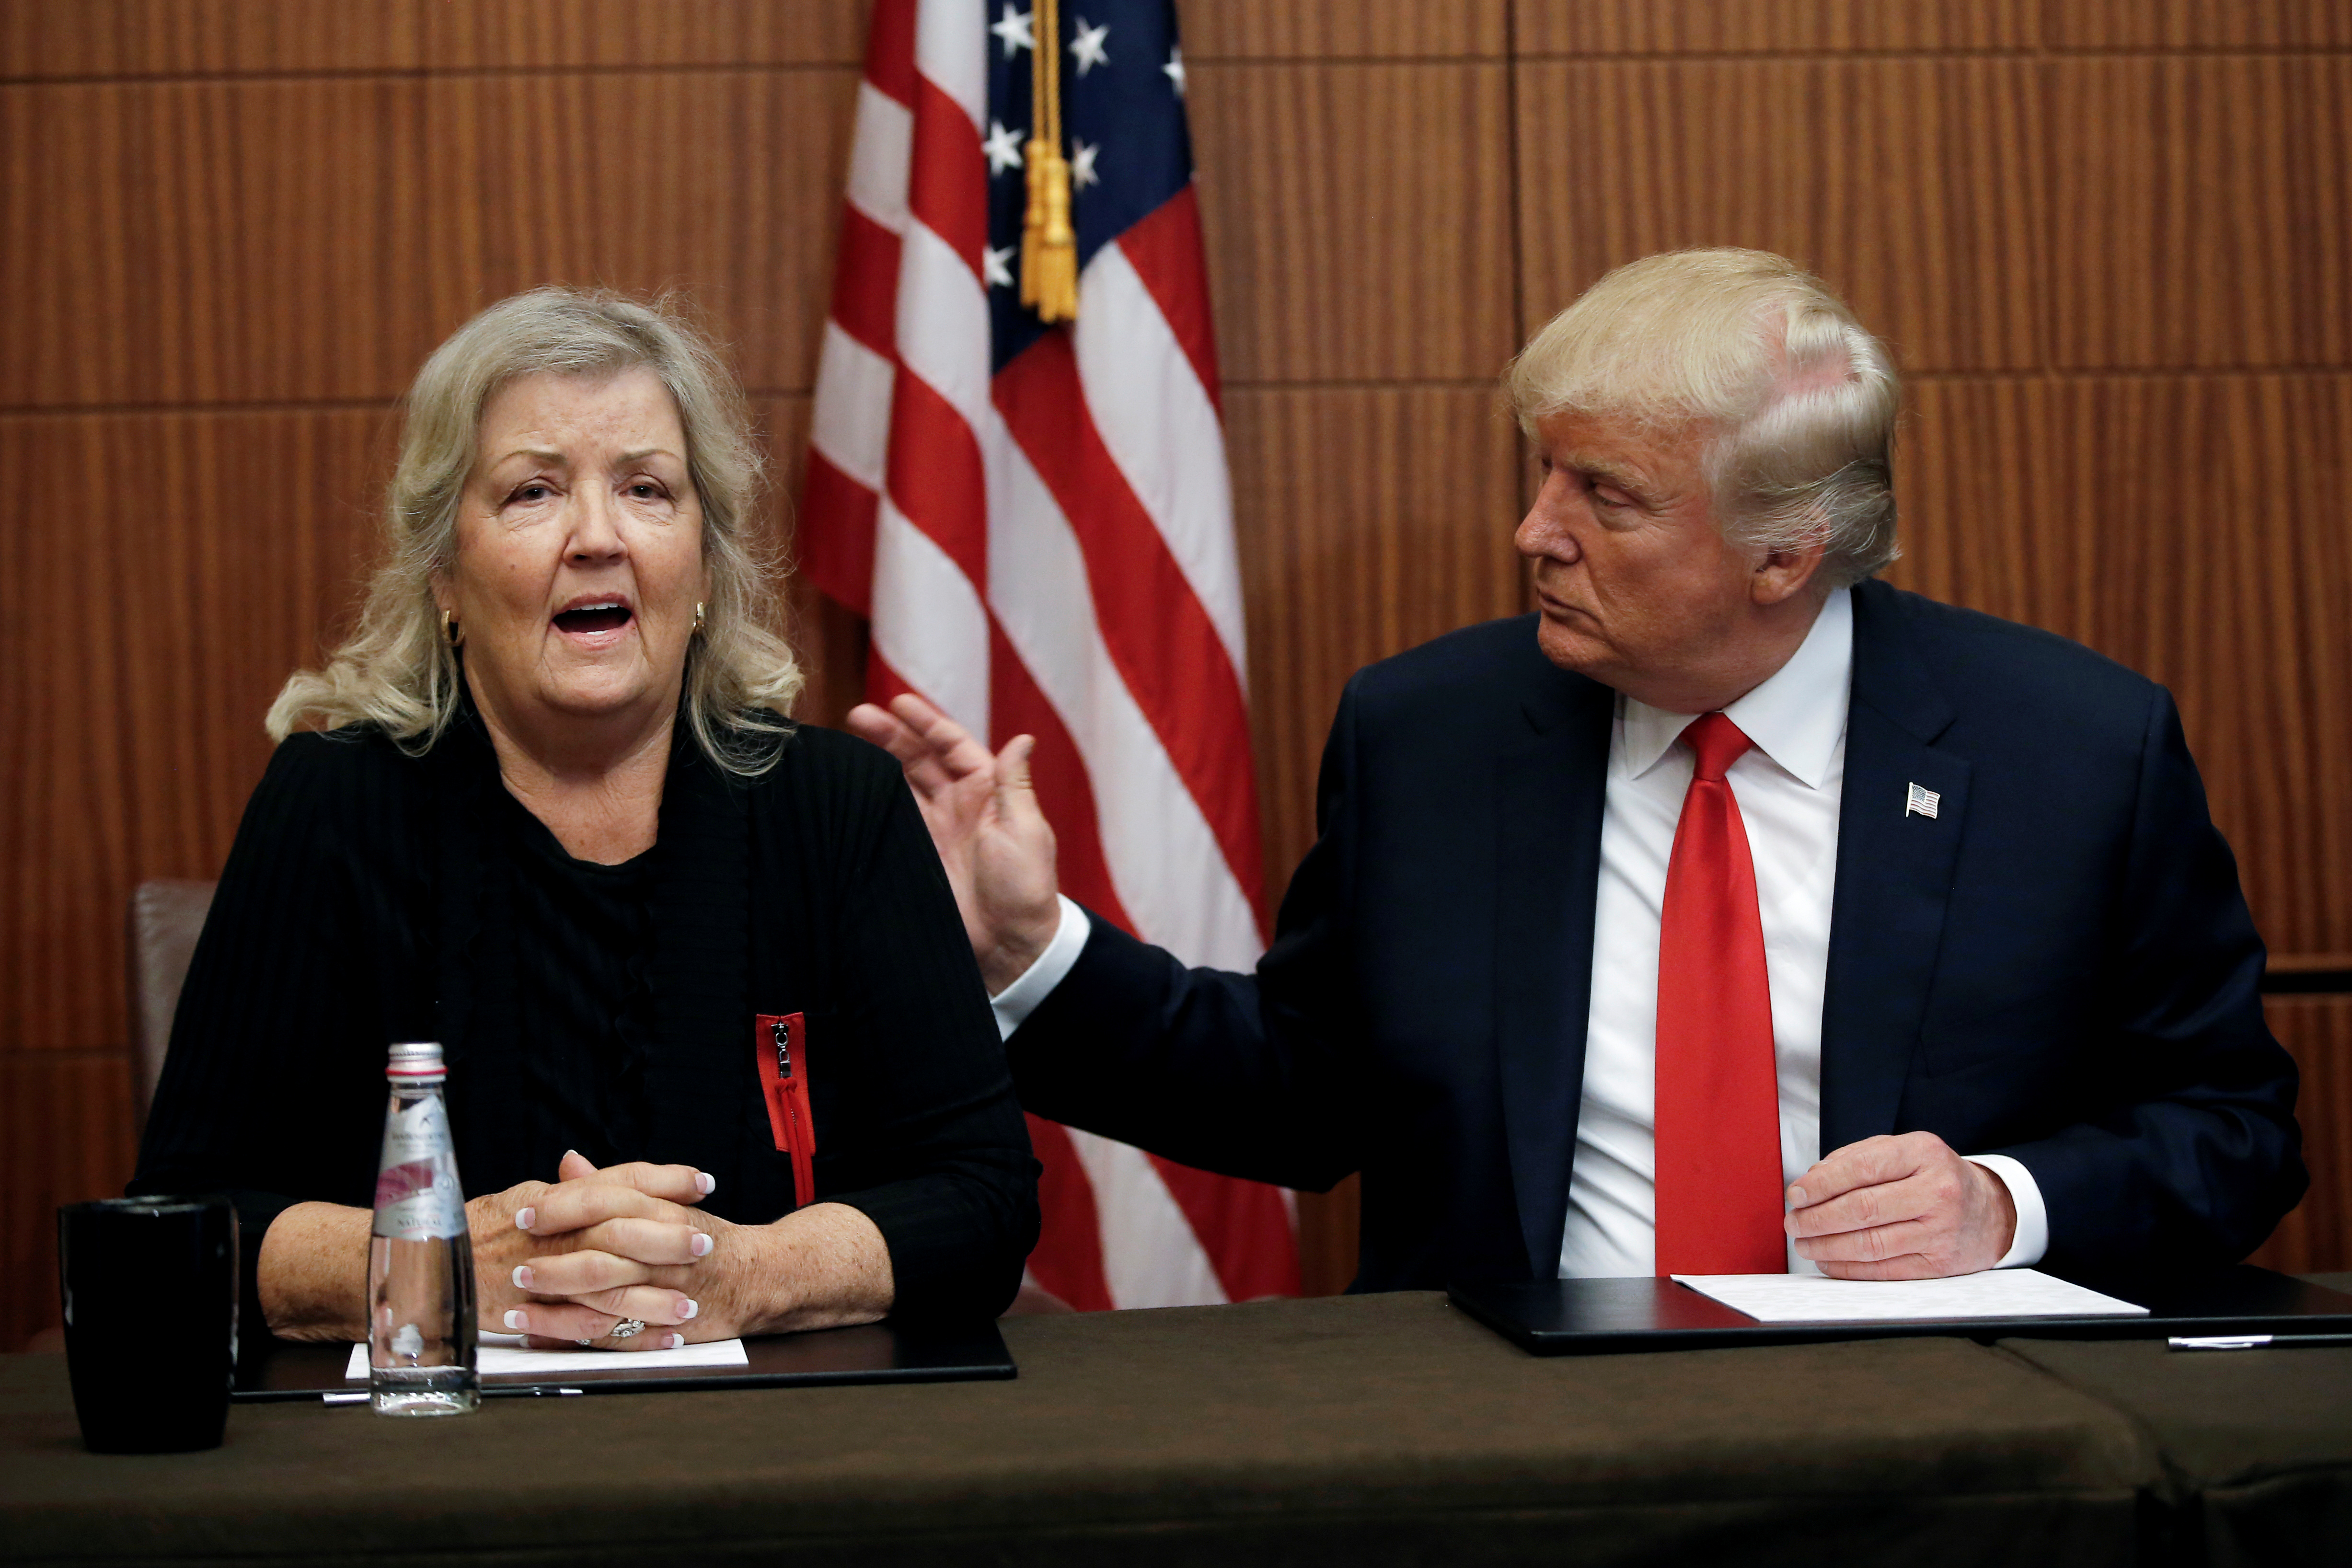 Republican presidential nominee Donald Trump sits with Juanita Broaddrick, in a hotel conference room in St. Louis, Missouri, U.S., shortly before the second presidential debate at Washington University in St. Louis, October 9, 2016. REUTERS/Mike Segar 